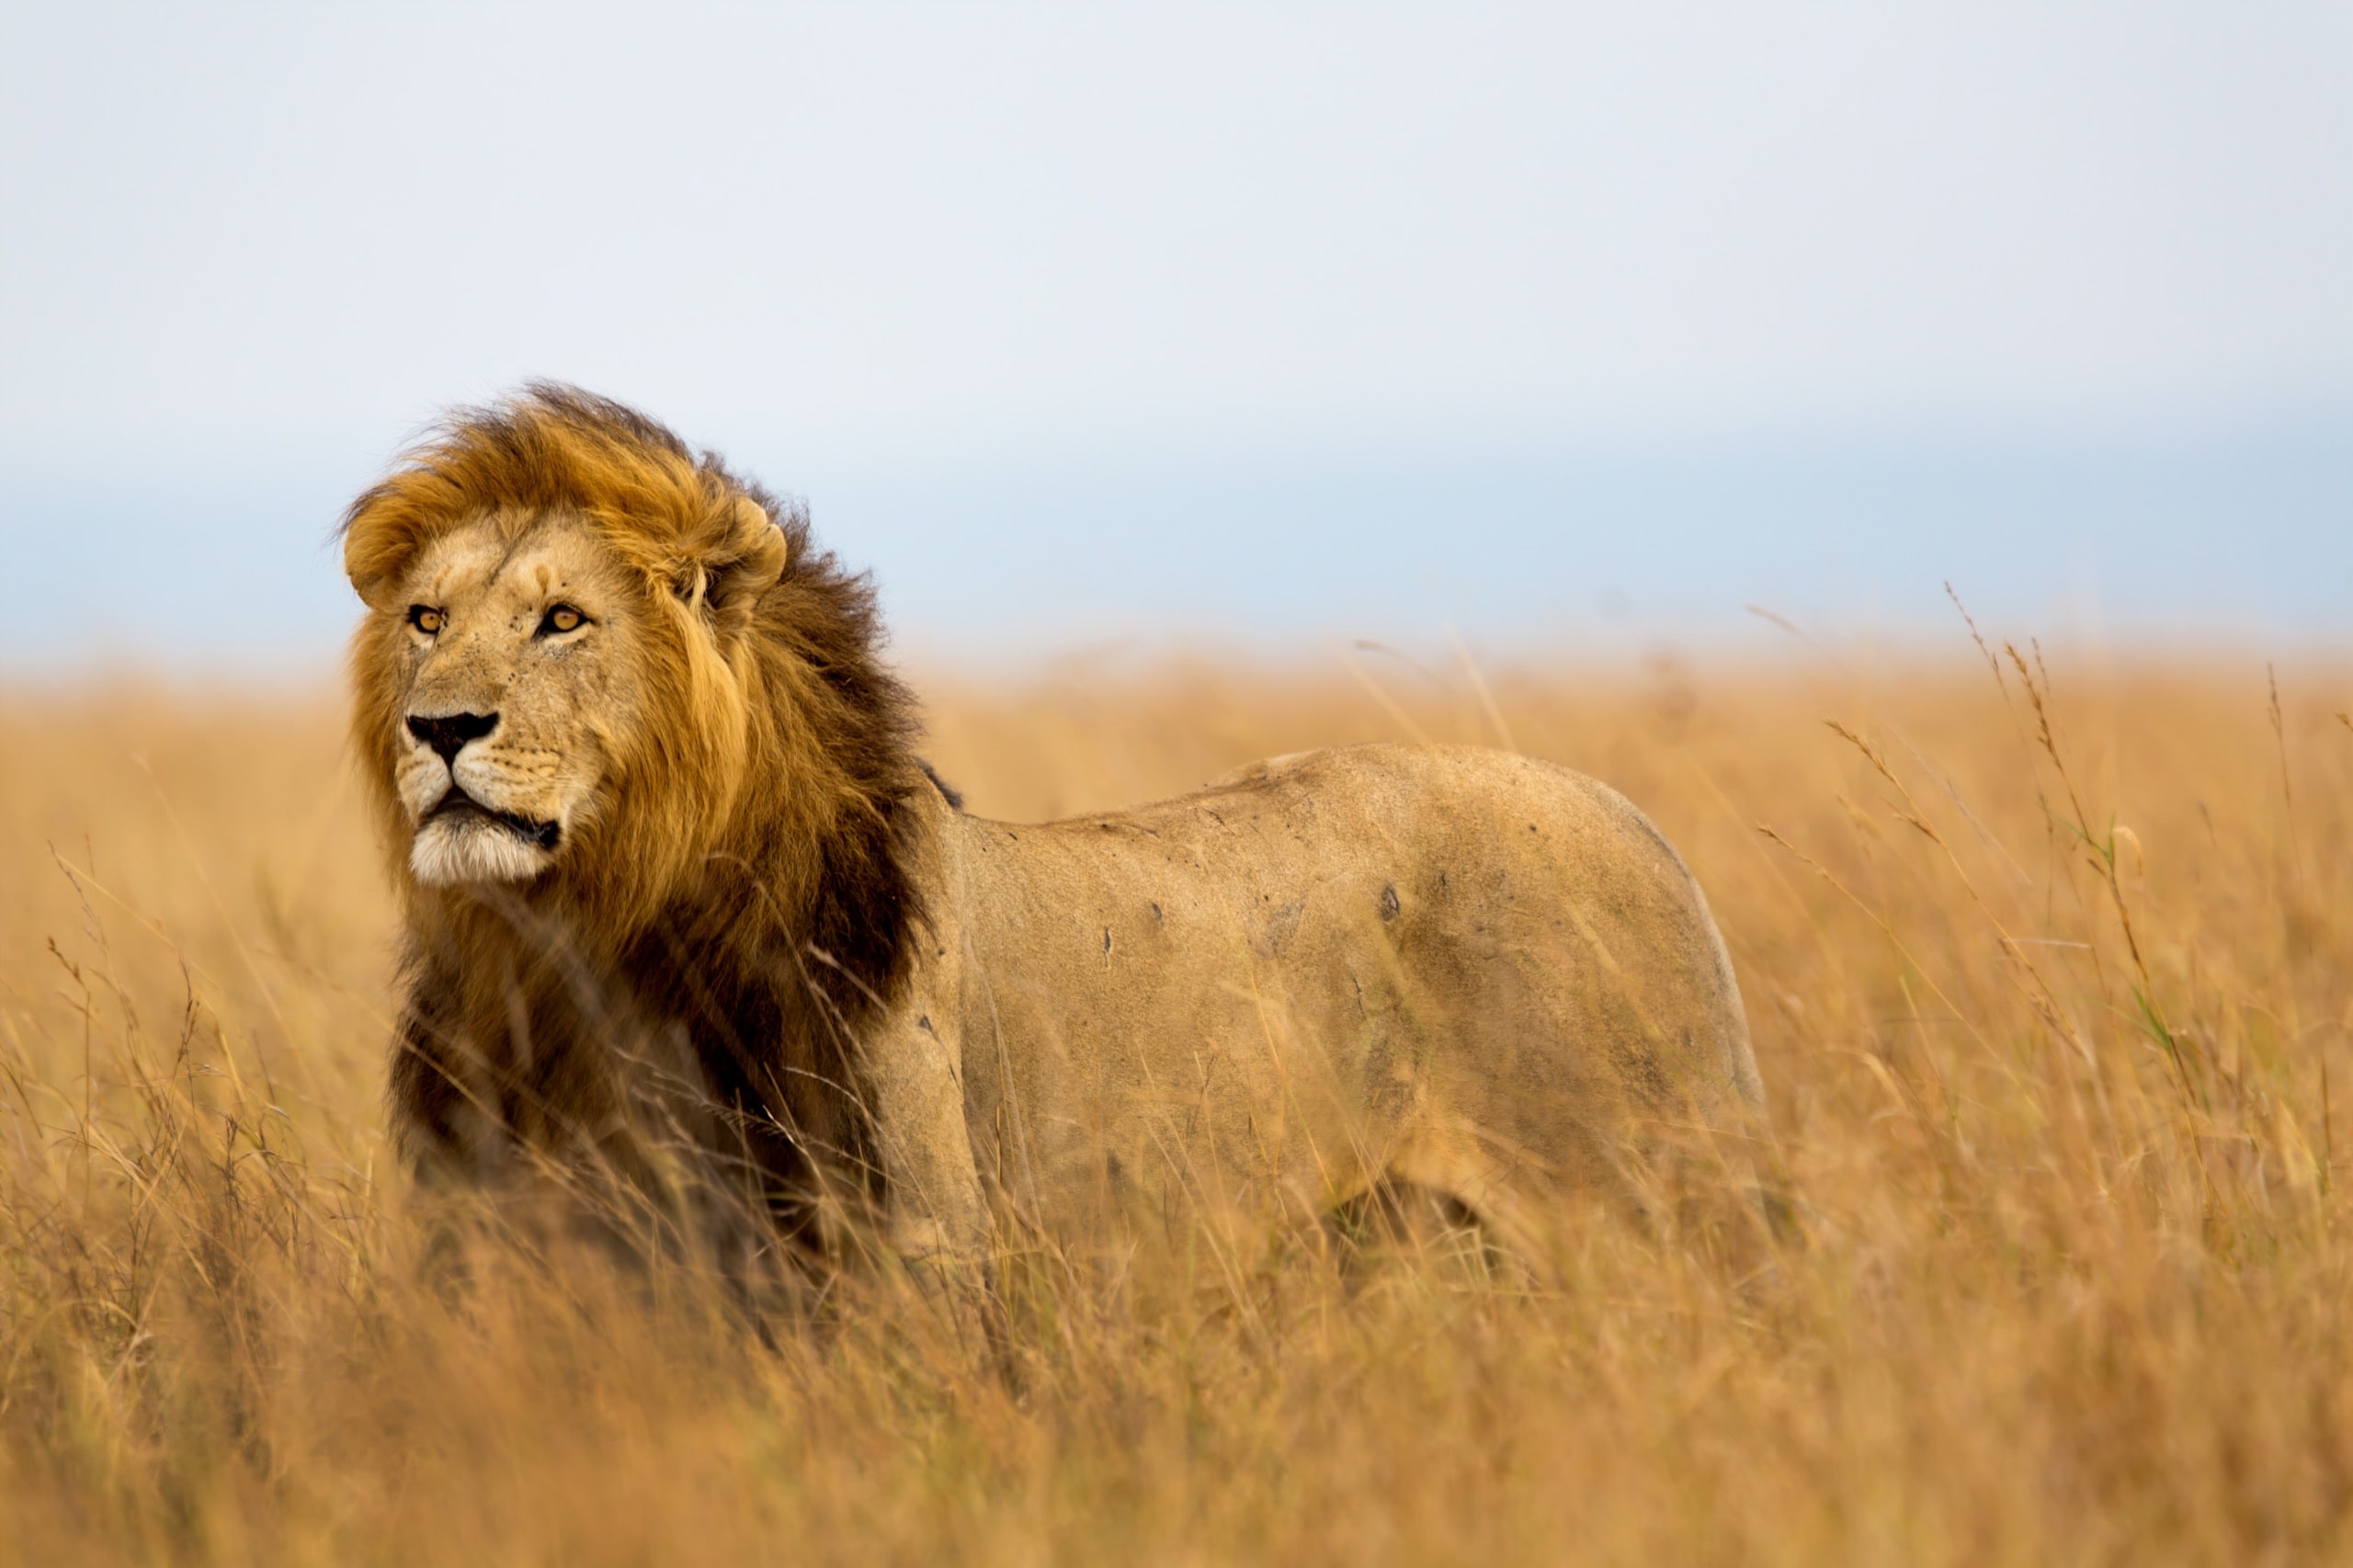 Mighty Lion watching the lionesses who are ready for the hunt in Masai Mara, Kenya